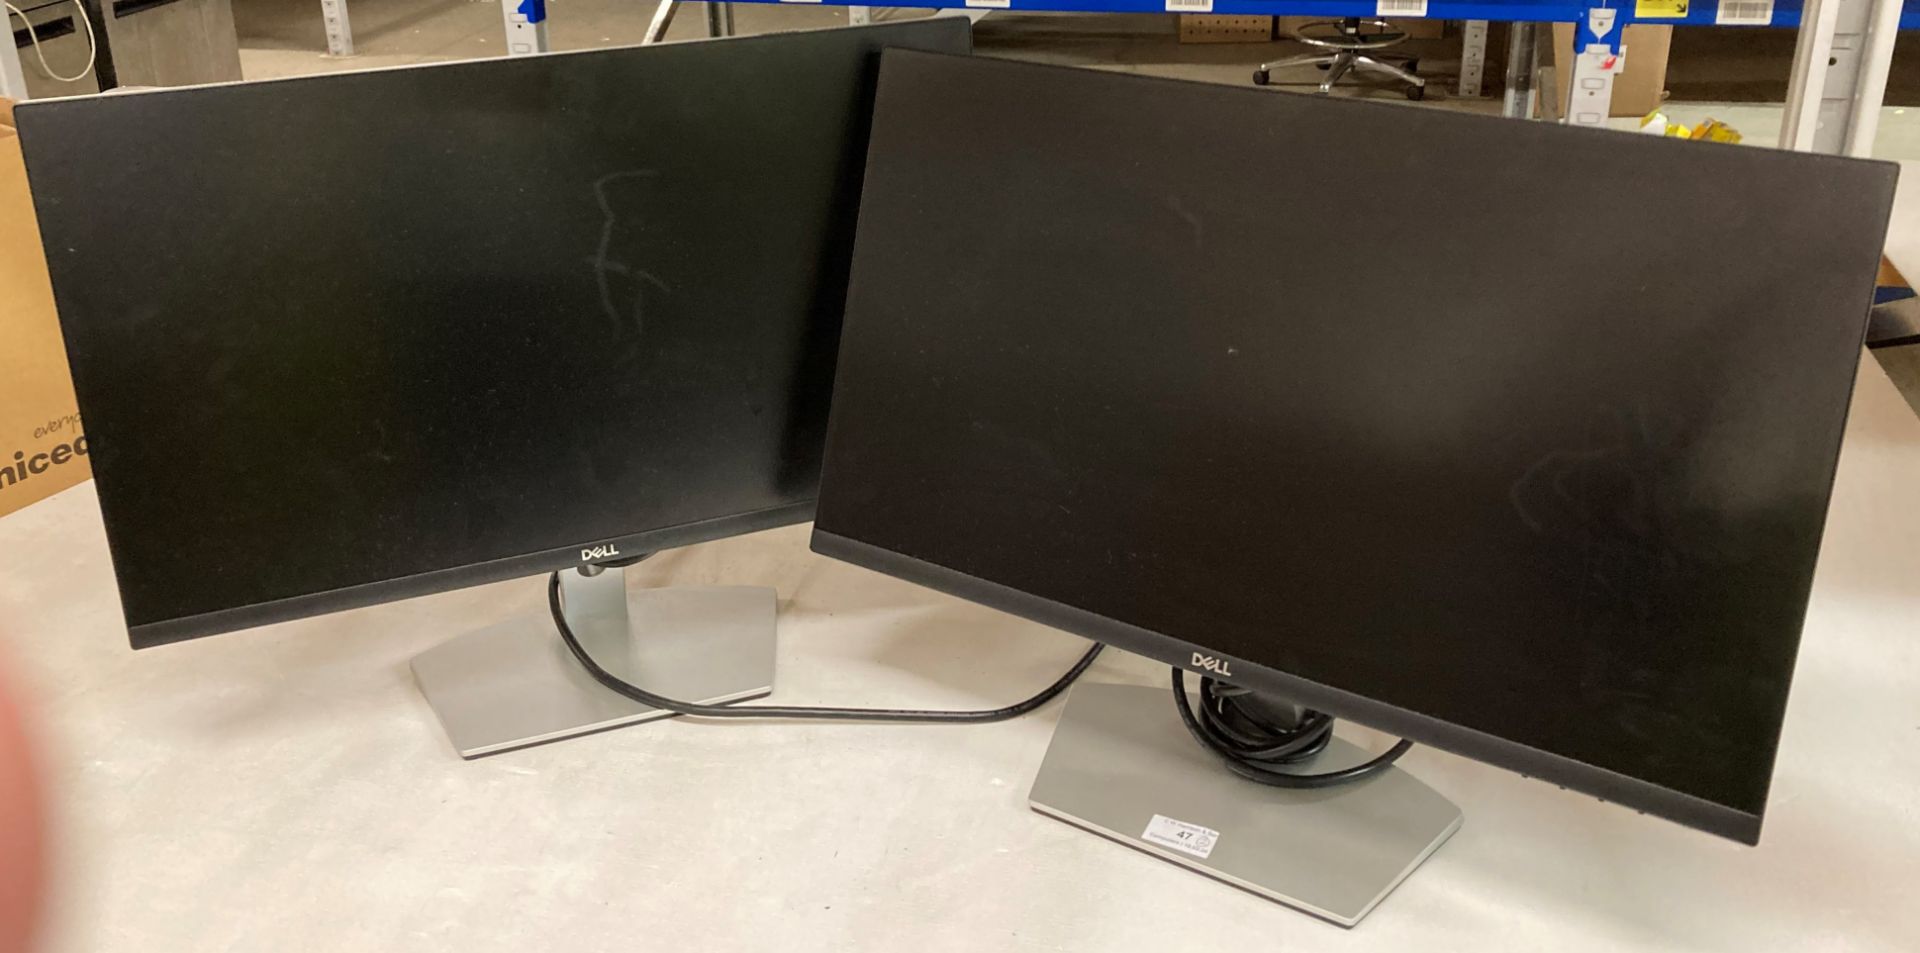 2 x Dell 24" S2421H flat panel computer monitors - complete with power leads (K10)